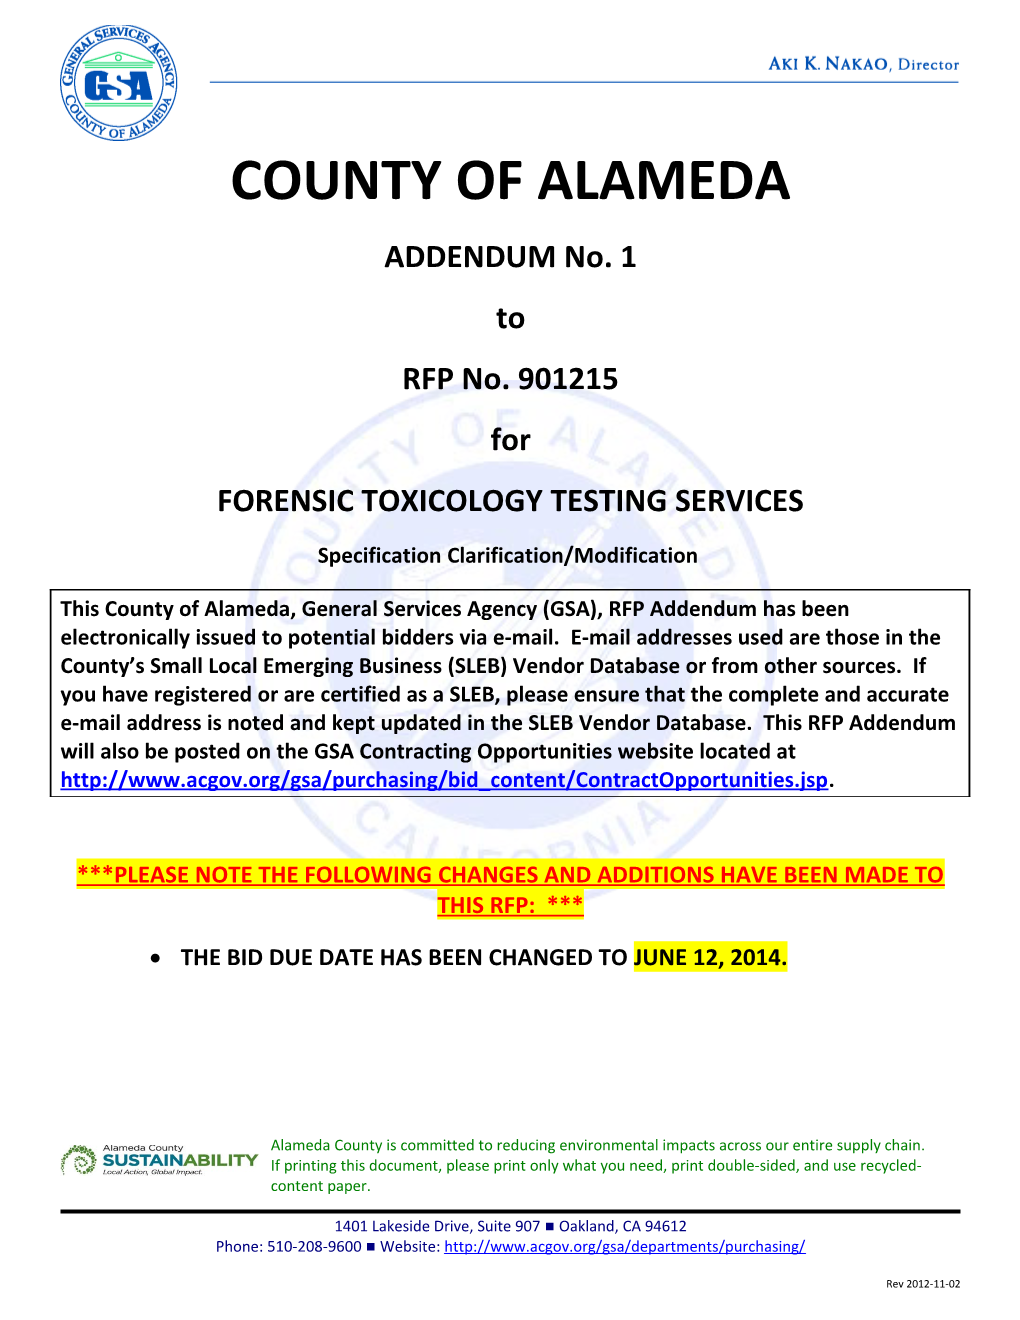 901215 - Add1 Forensic Toxicology Testing